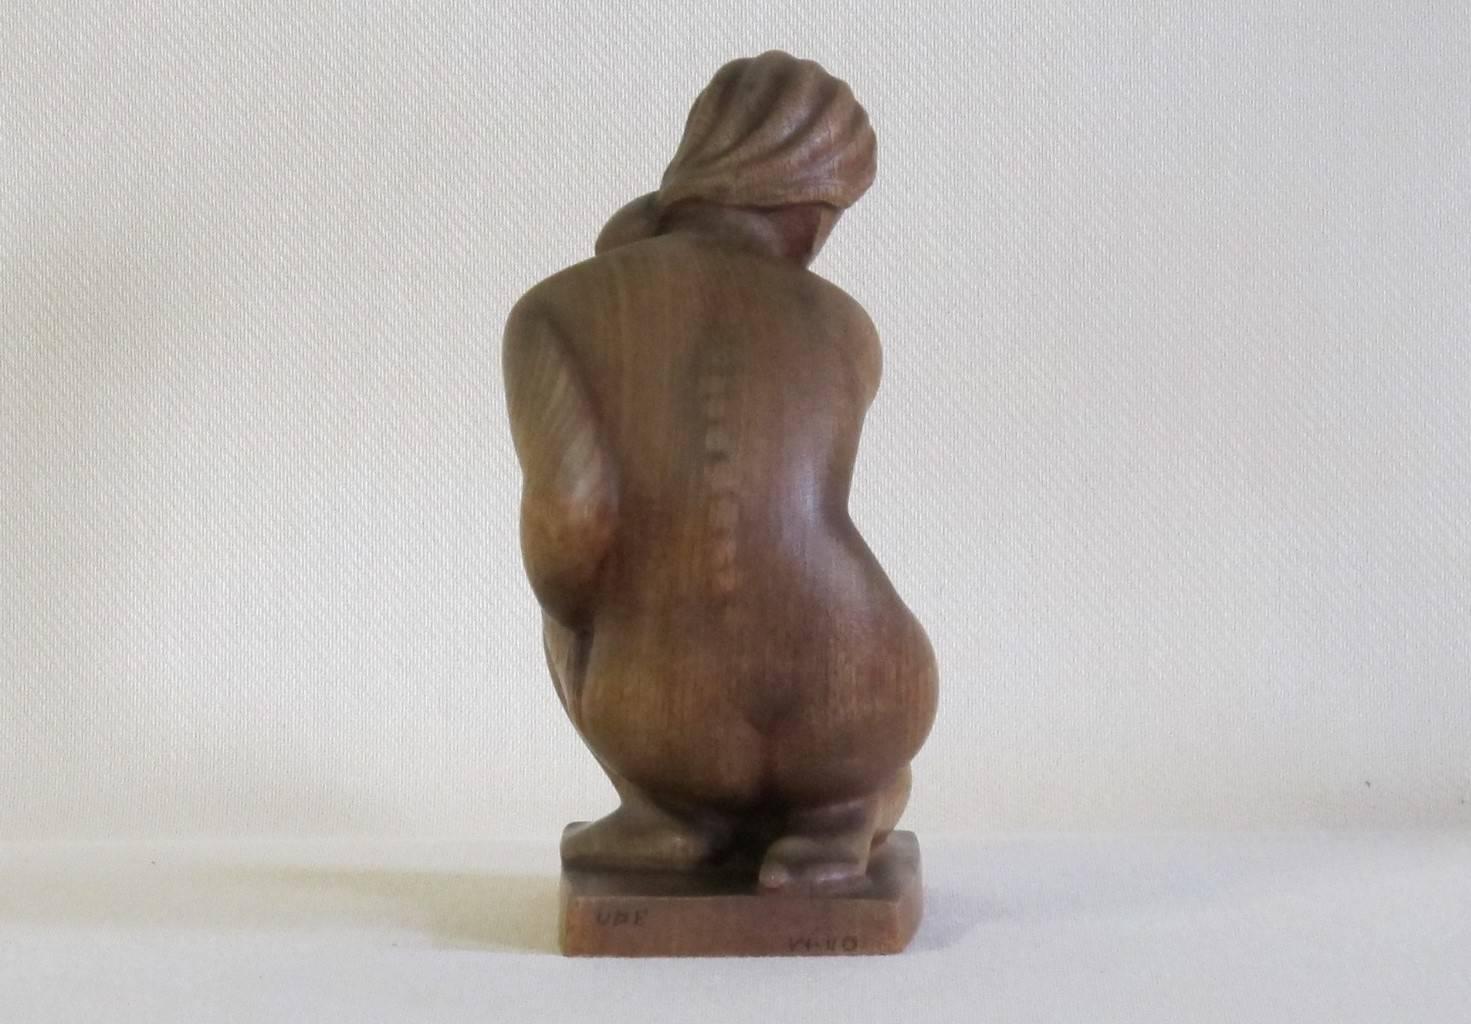 A beautiful sculpture of a nude seated woman made of teakwood, designed by Kurt Harald Isenstein. The woman drapes her hair to the side of her face, whereas the sculpture shows a great mastery of craftsmanship, as the wooden veins follow the forms